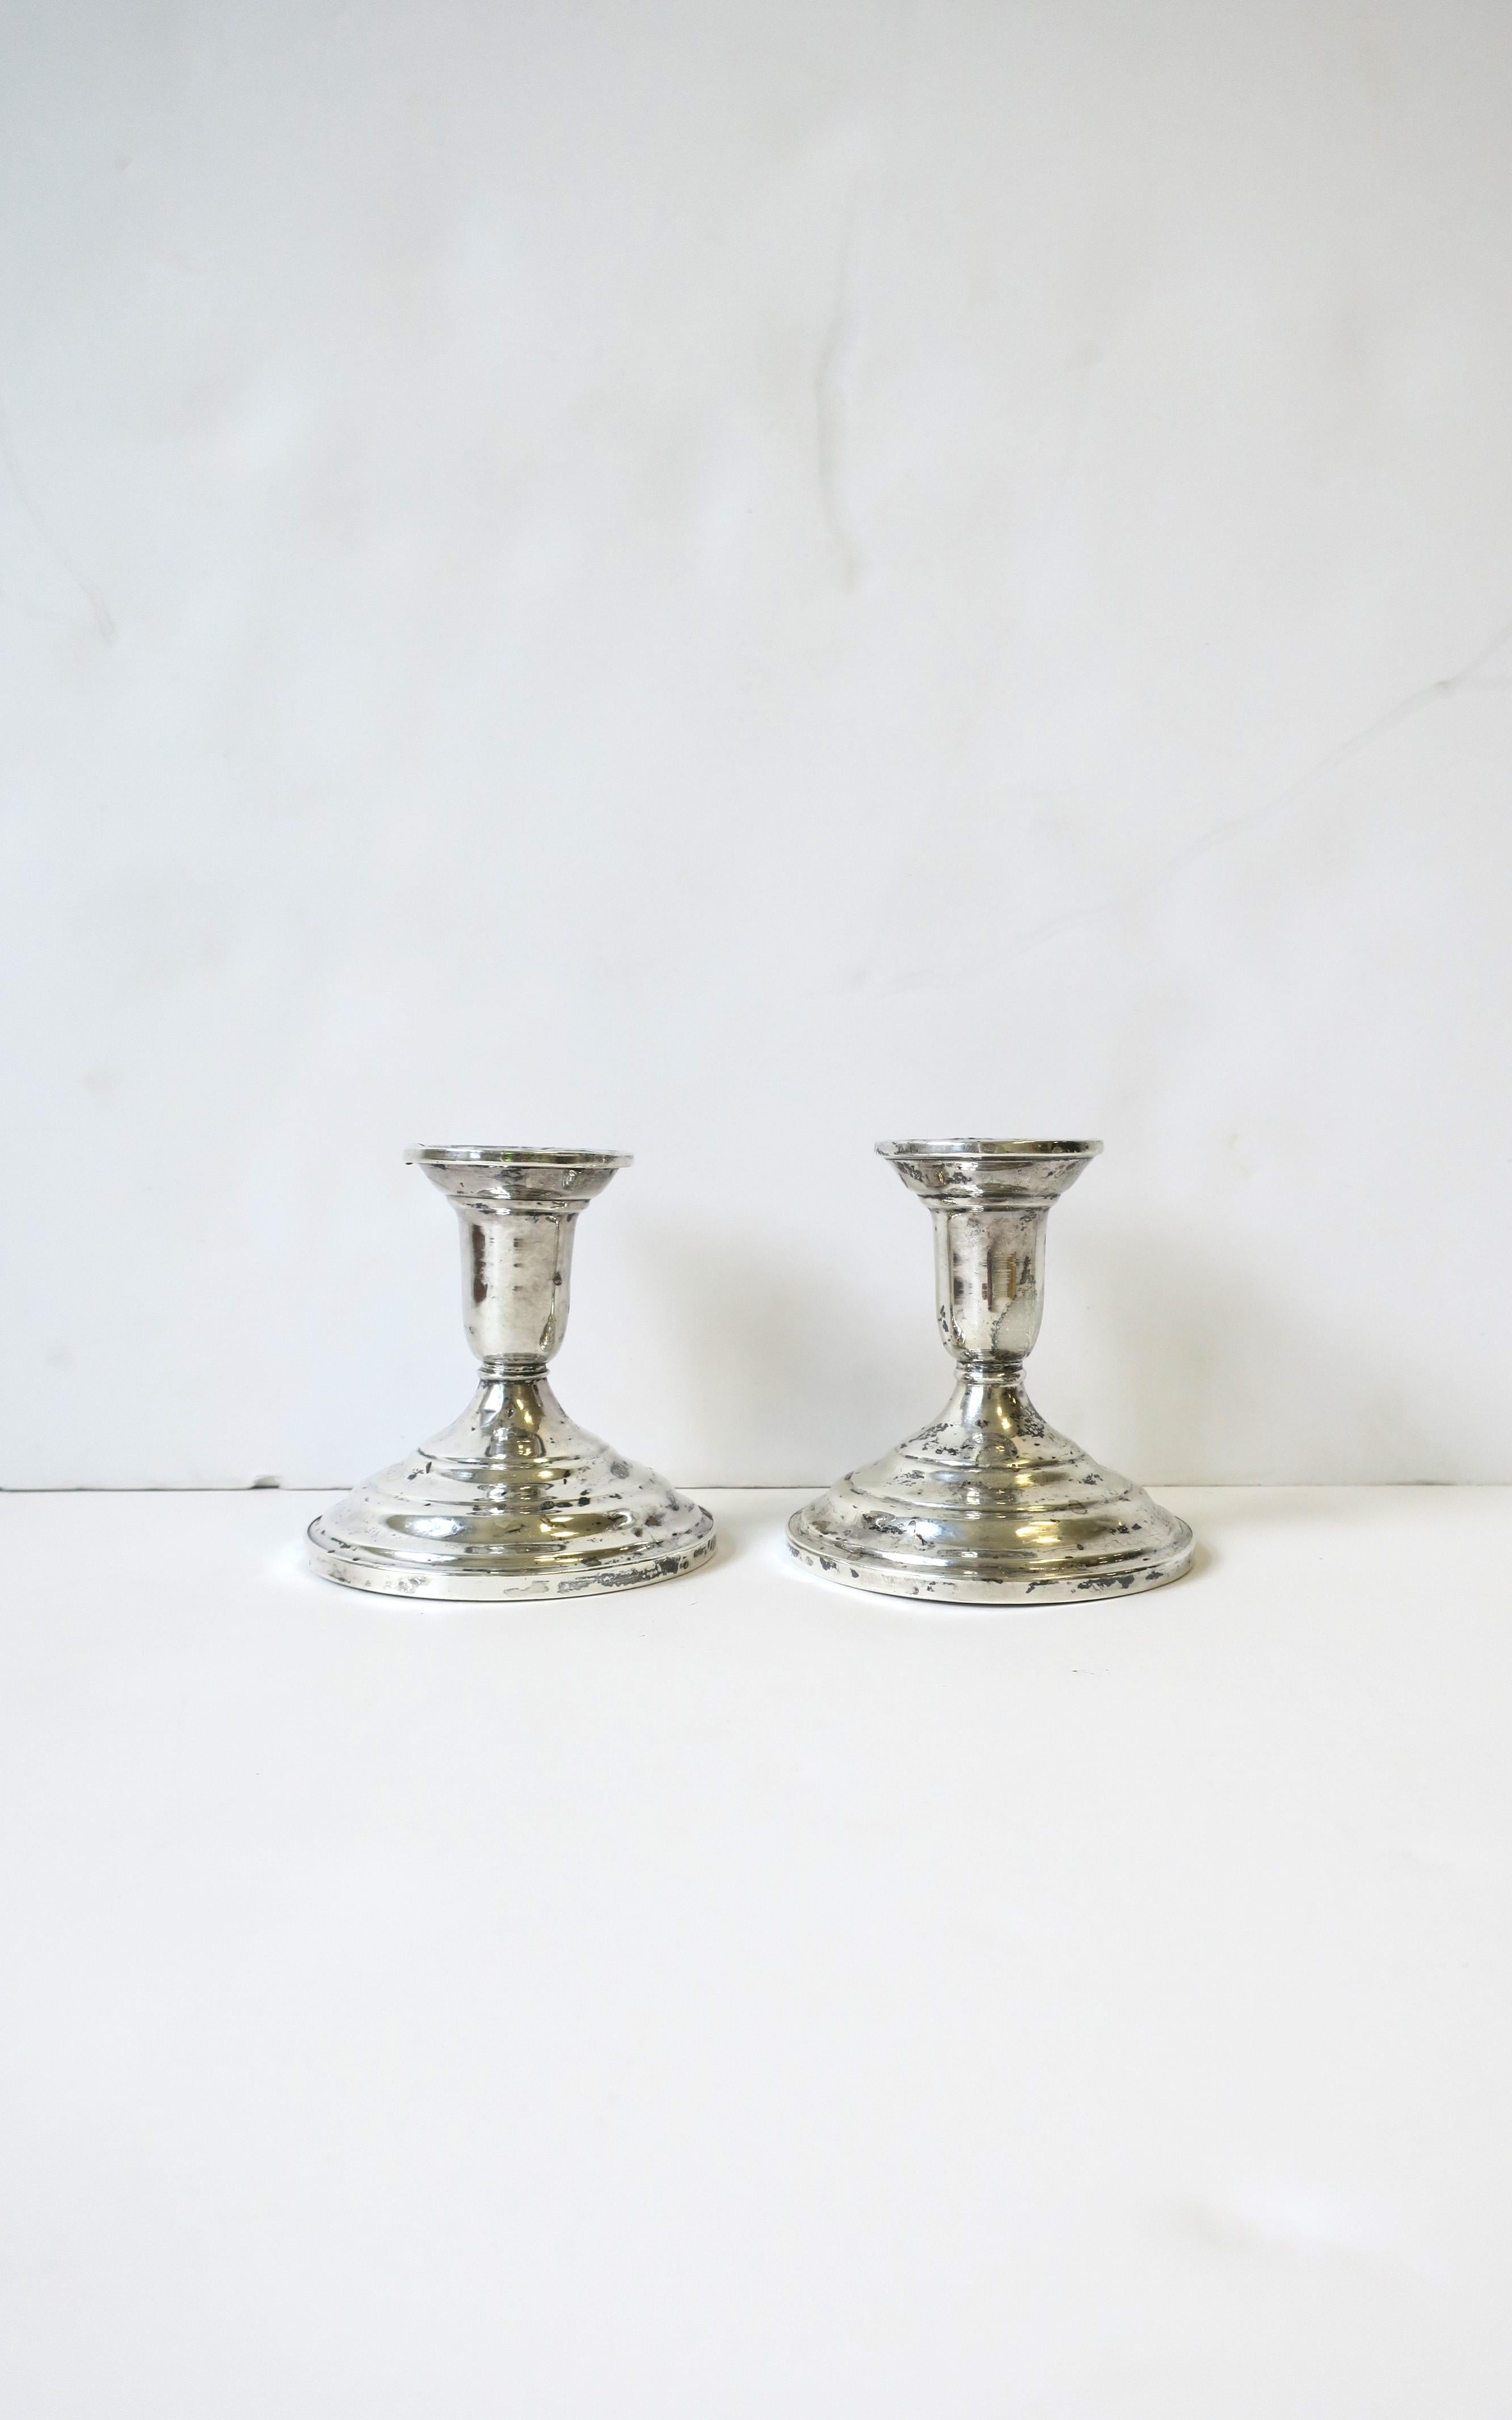 English Sterling Silver Candlesticks Candlestick Holders, Pair, circa 1960s For Sale